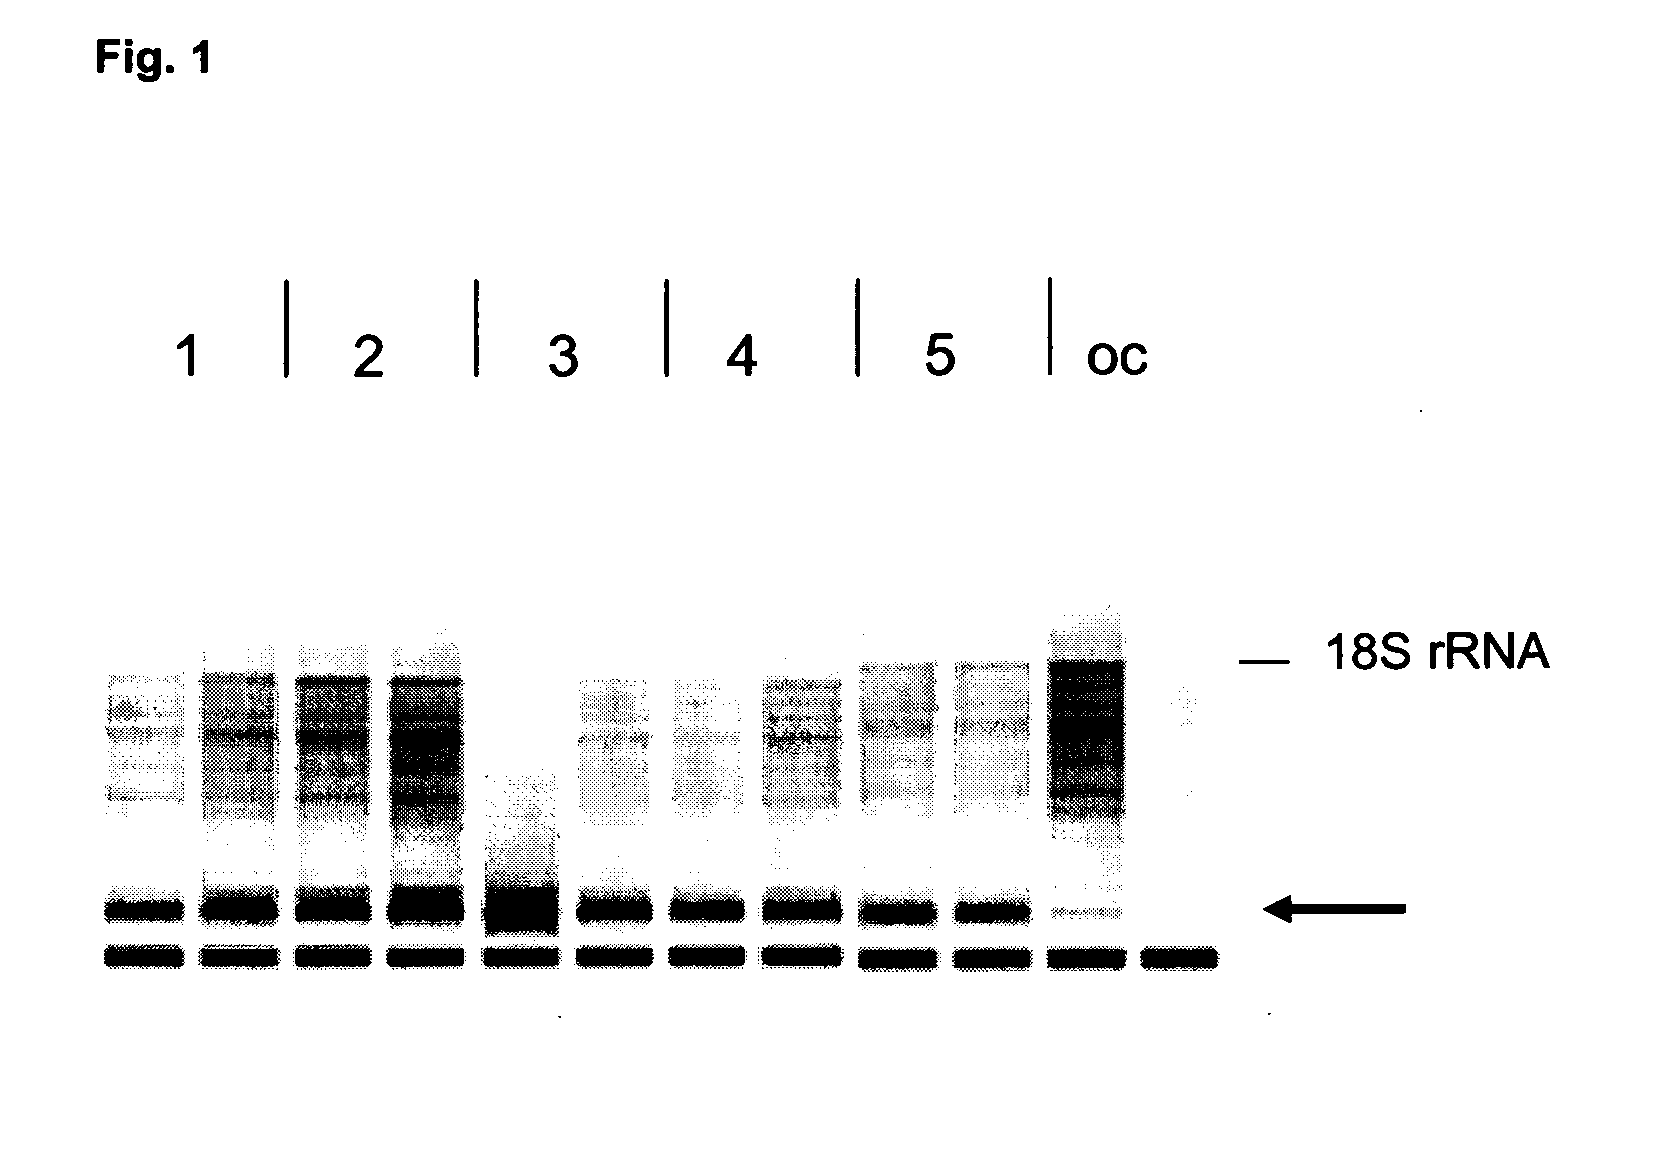 Method for isolating RNA from a RNA and DNA containing sample